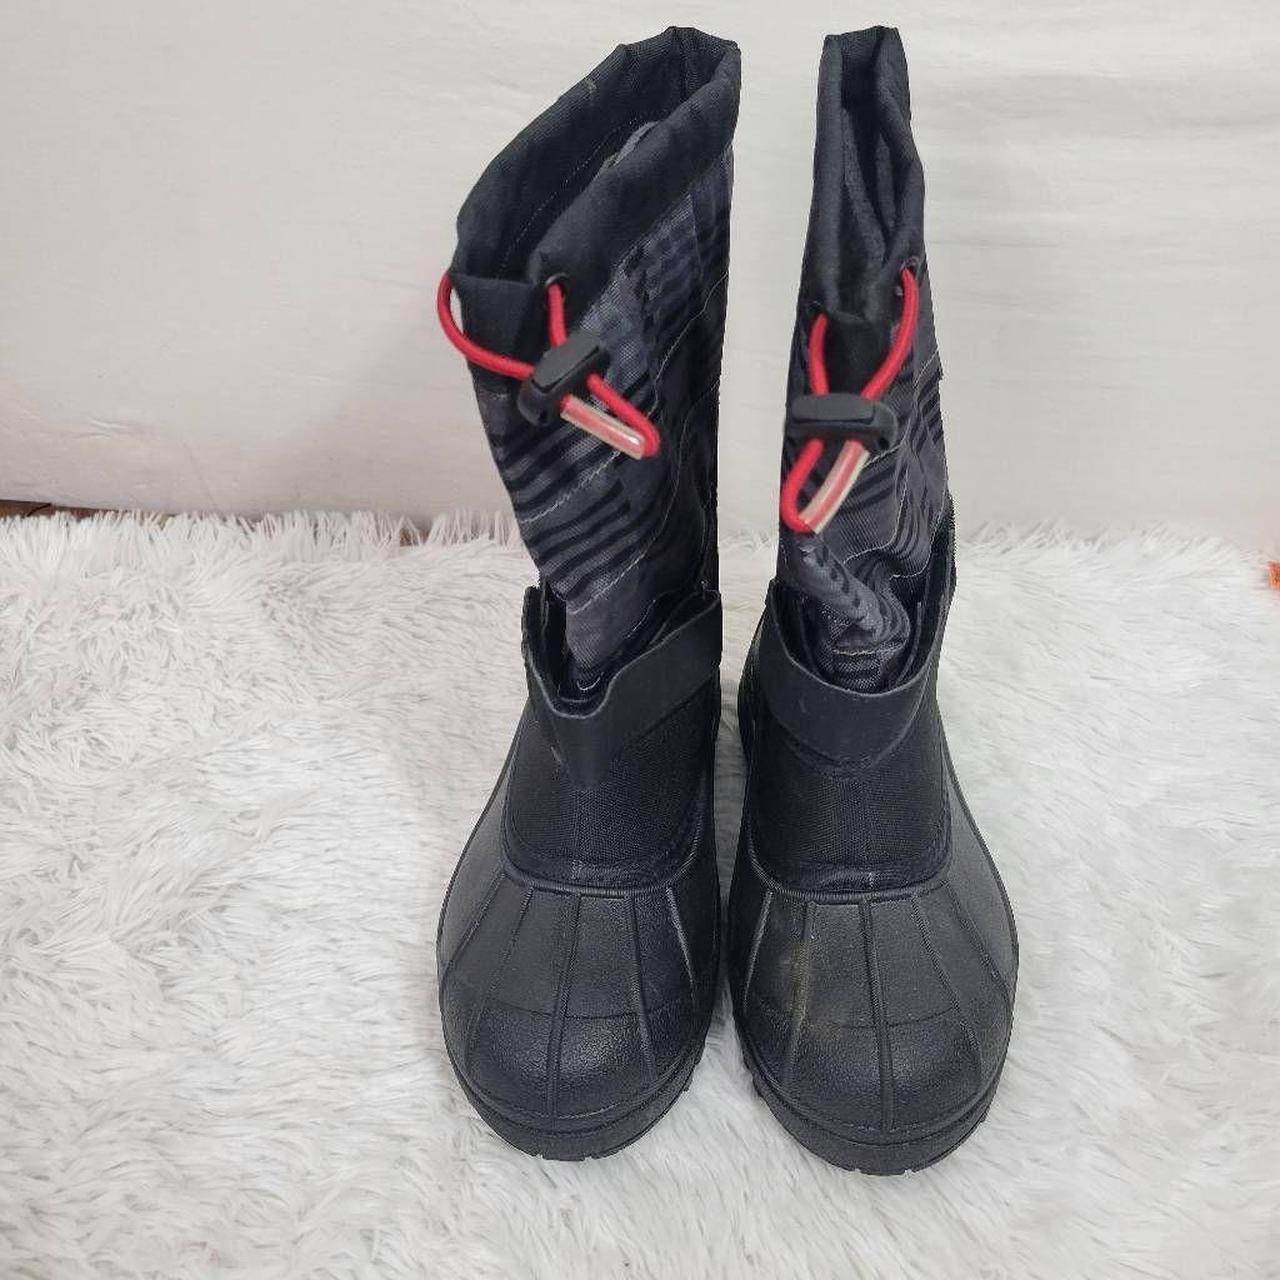 Columbia Sportswear Black and Red Boots | Depop